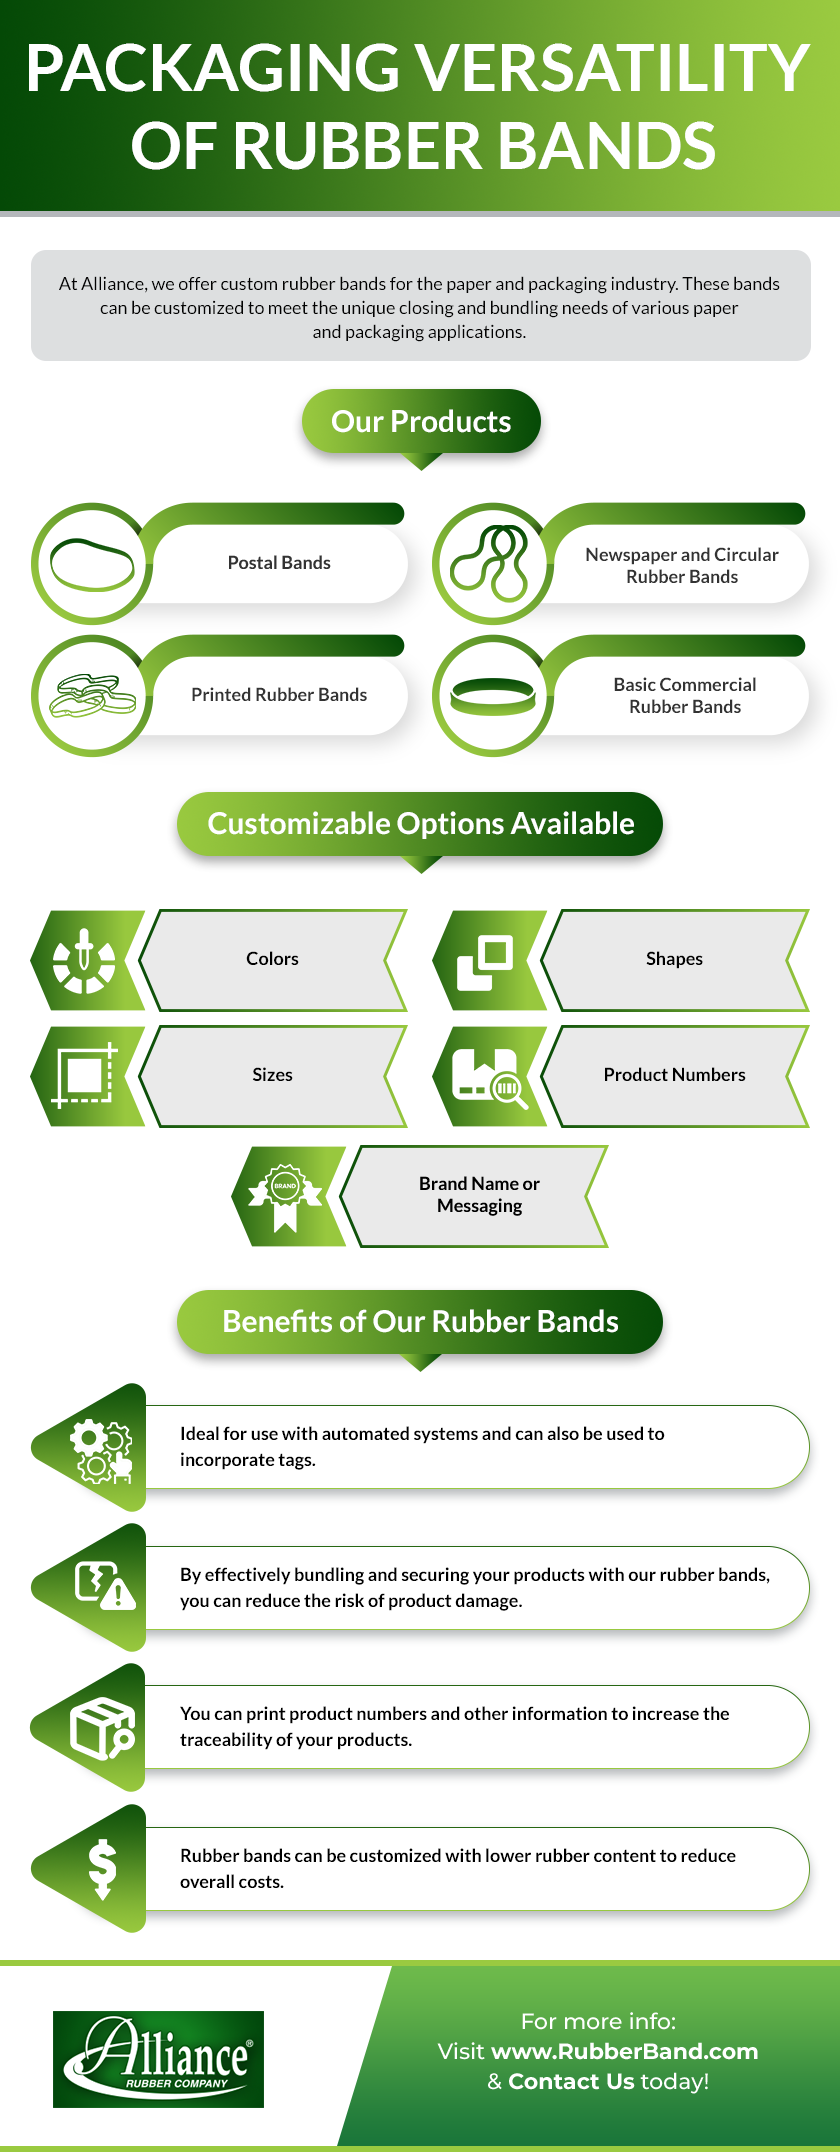 Infographic explaining packaging versatility of rubber bands